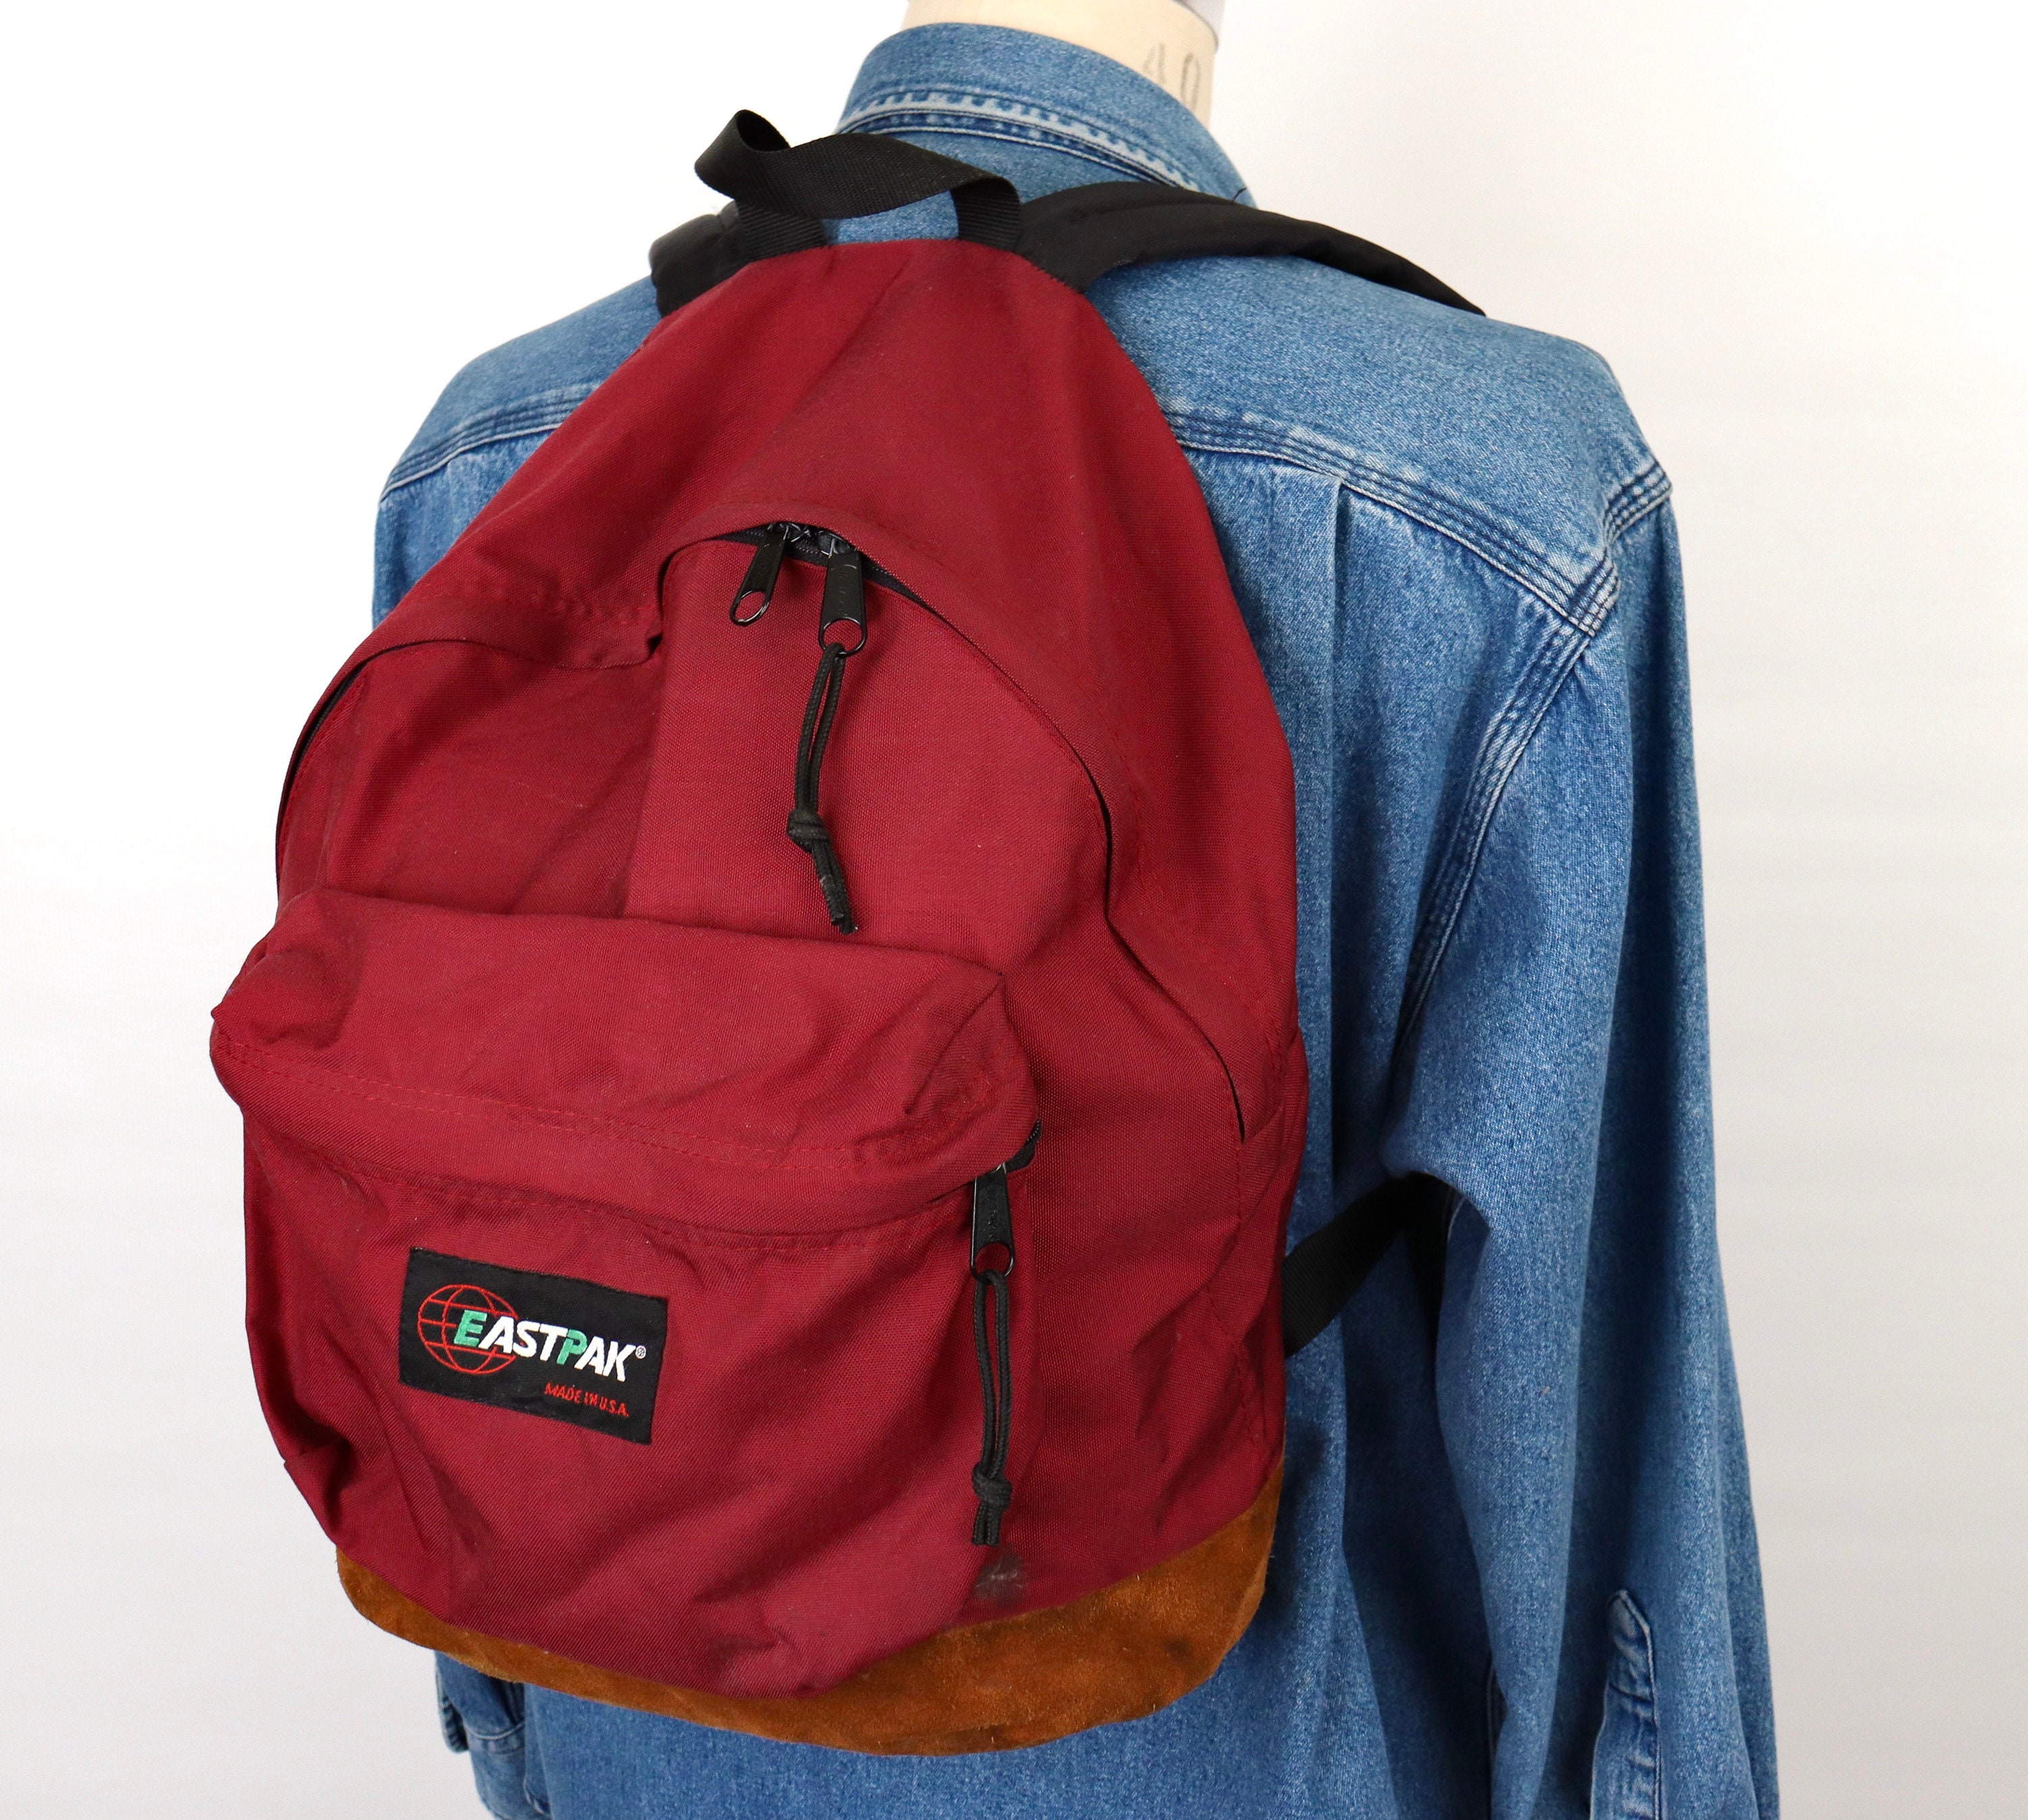 Classic 1990s Eastpak Backpack With Brown Suede and Burgundy